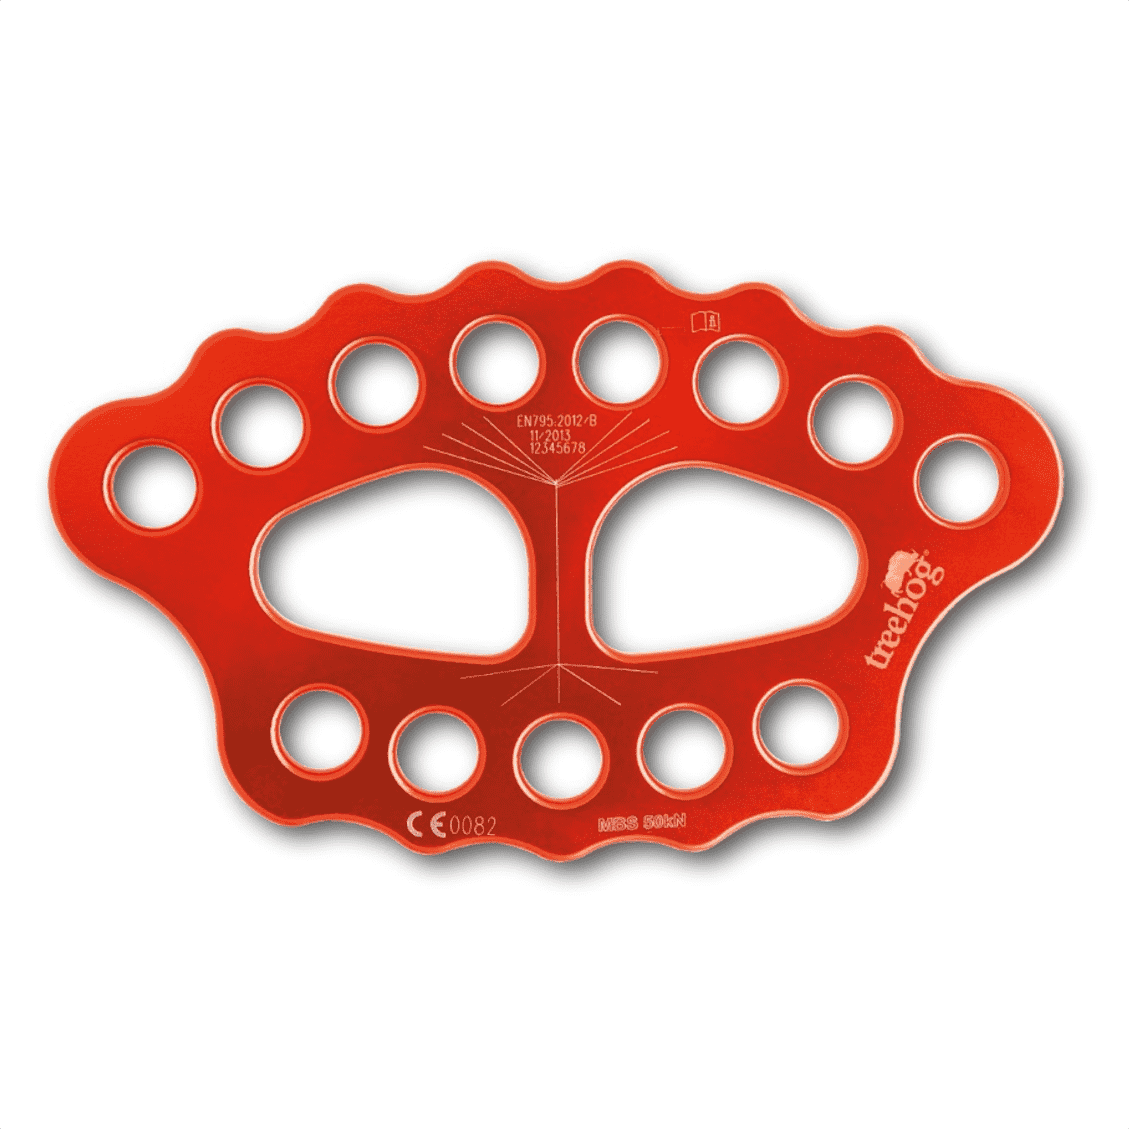 THRP3 Rigging Plate 15 Hole